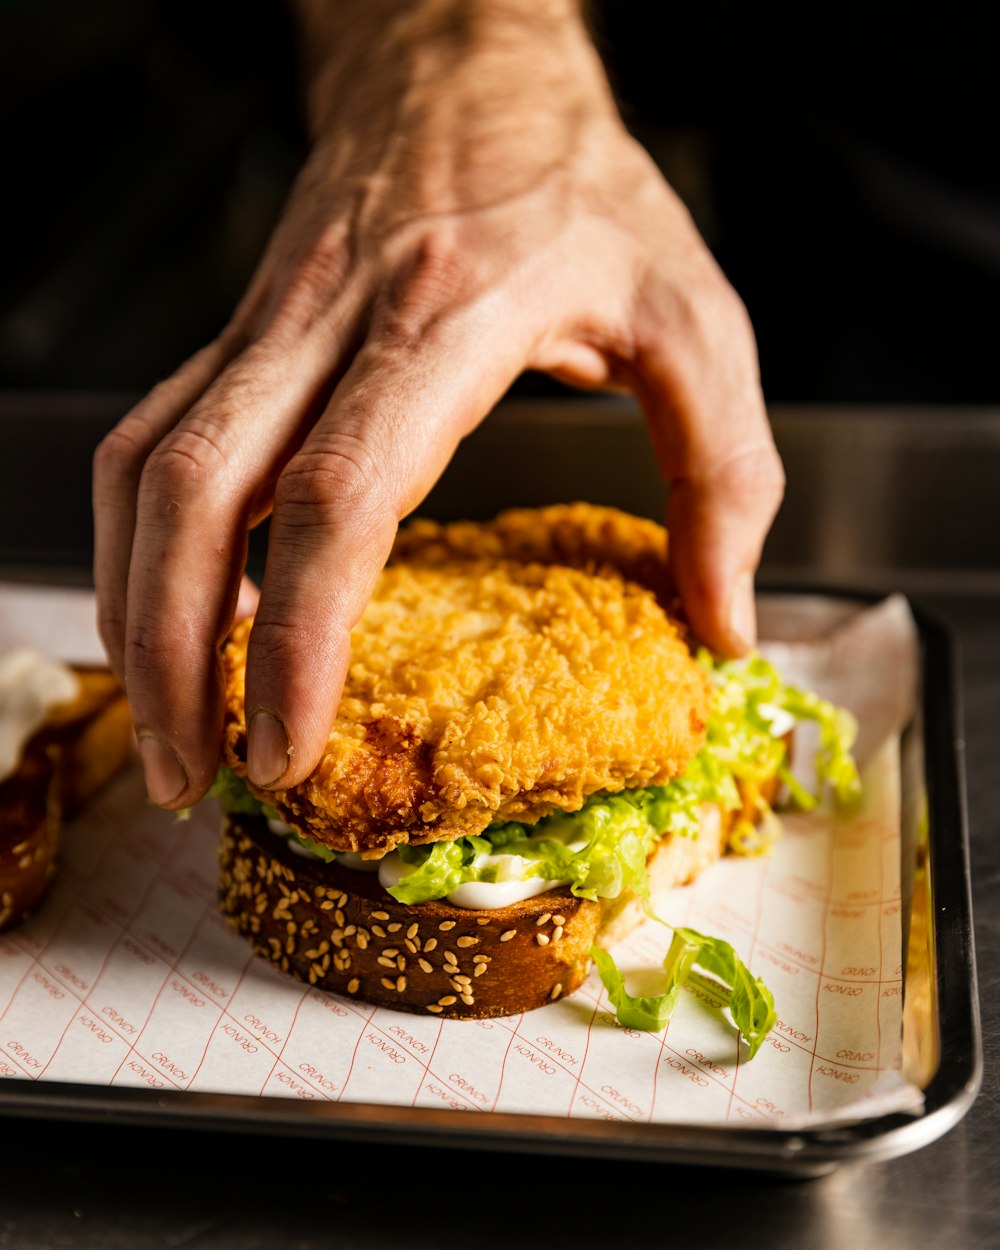 a person reaching for a fried chicken sandwich